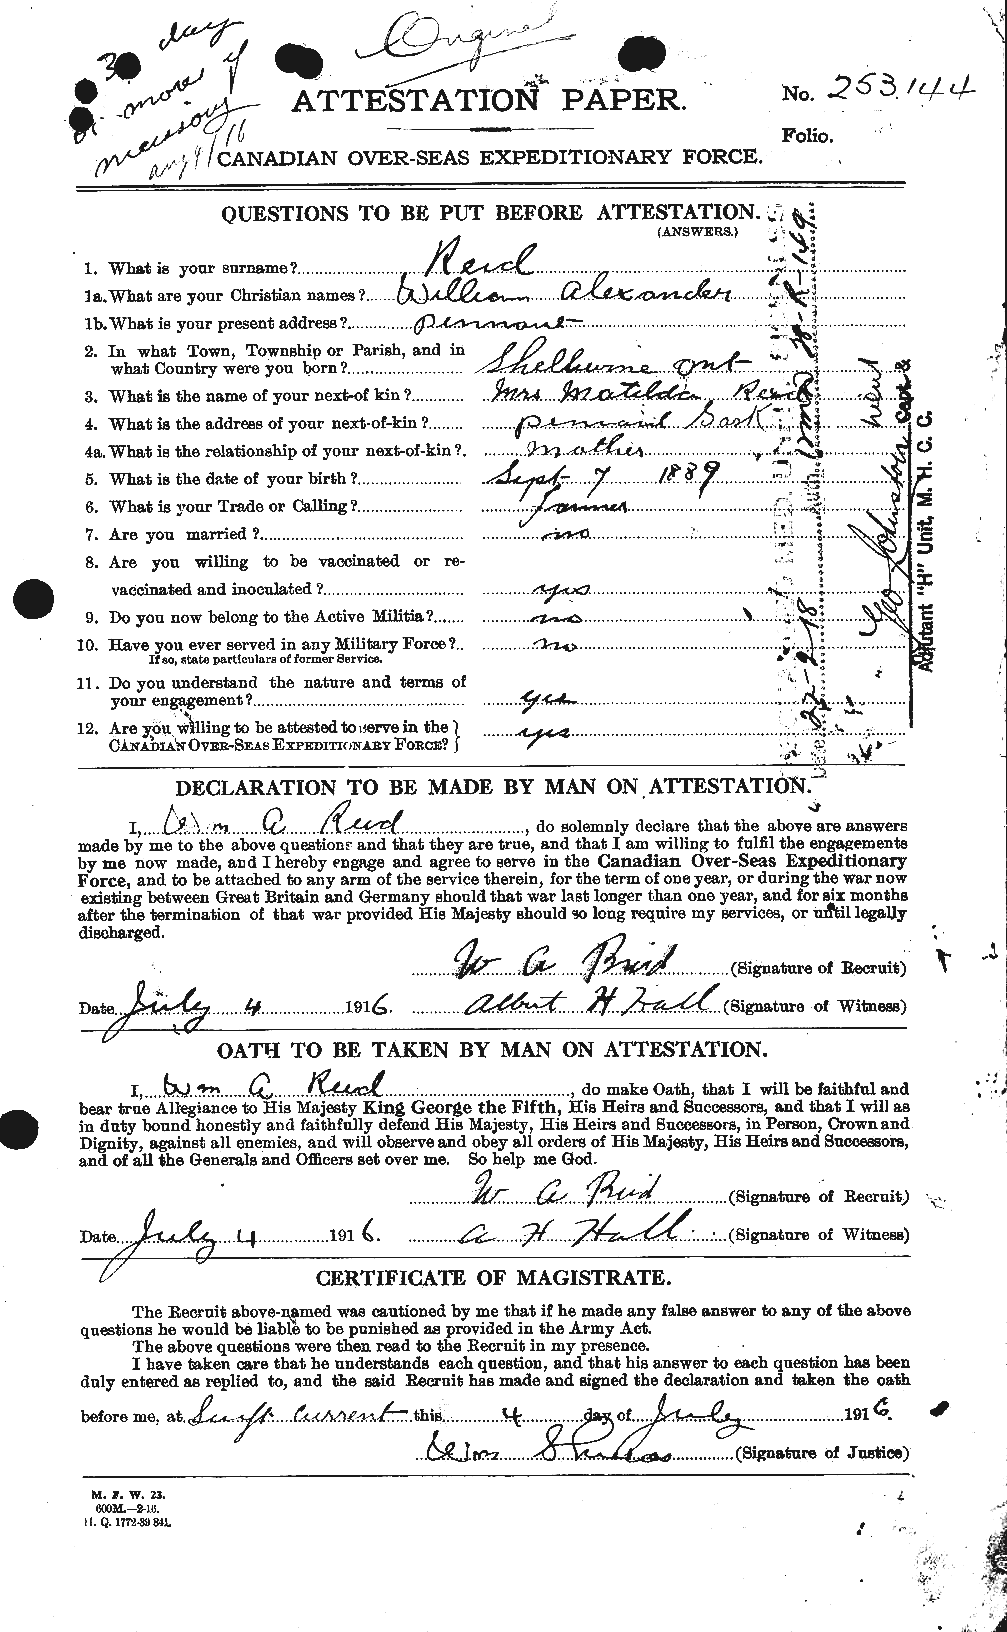 Personnel Records of the First World War - CEF 596957a